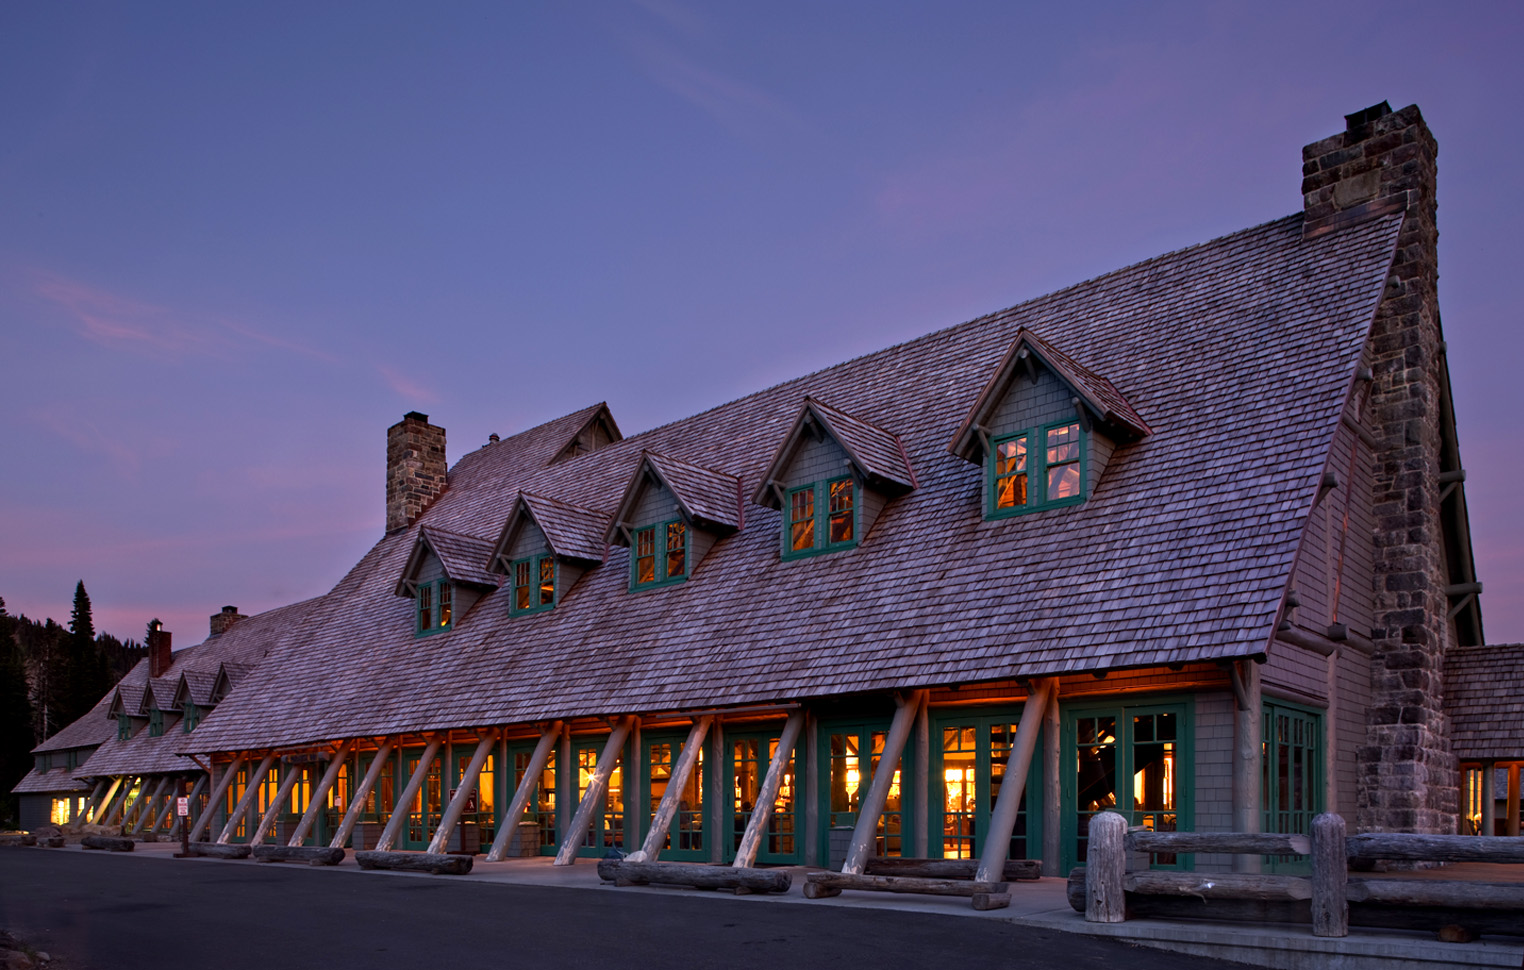 NPS Paradise Inn Rehabilitation. A large, rustic wood and log-framed lodge is shown at dusk while lights glow from within . Dormer windows line the roof, and a massive stone chimney is featured on the end of the building.